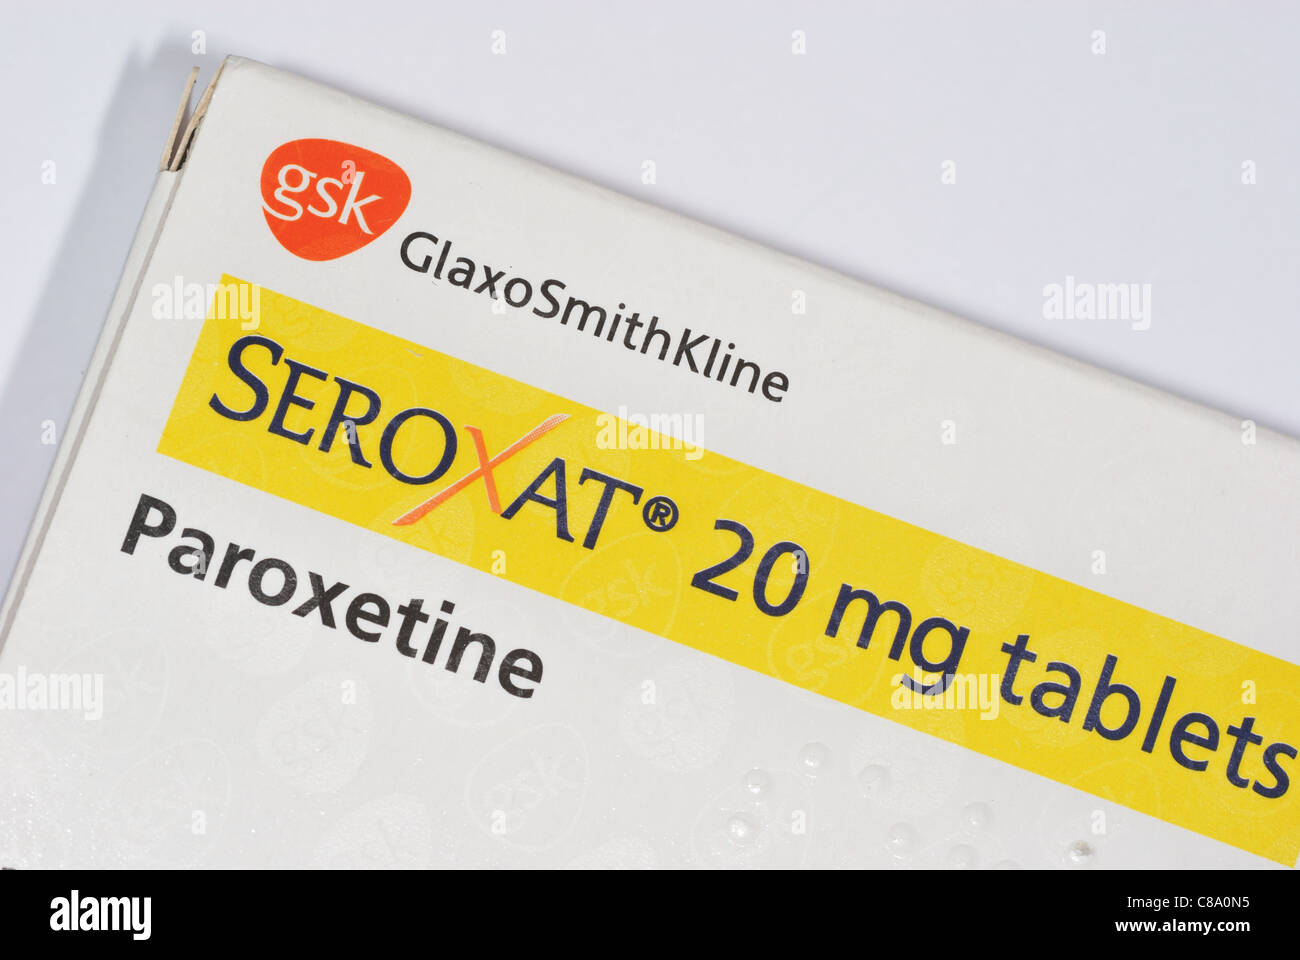 seroxat or paxil in 20mg dose Stock Photo - Alamy